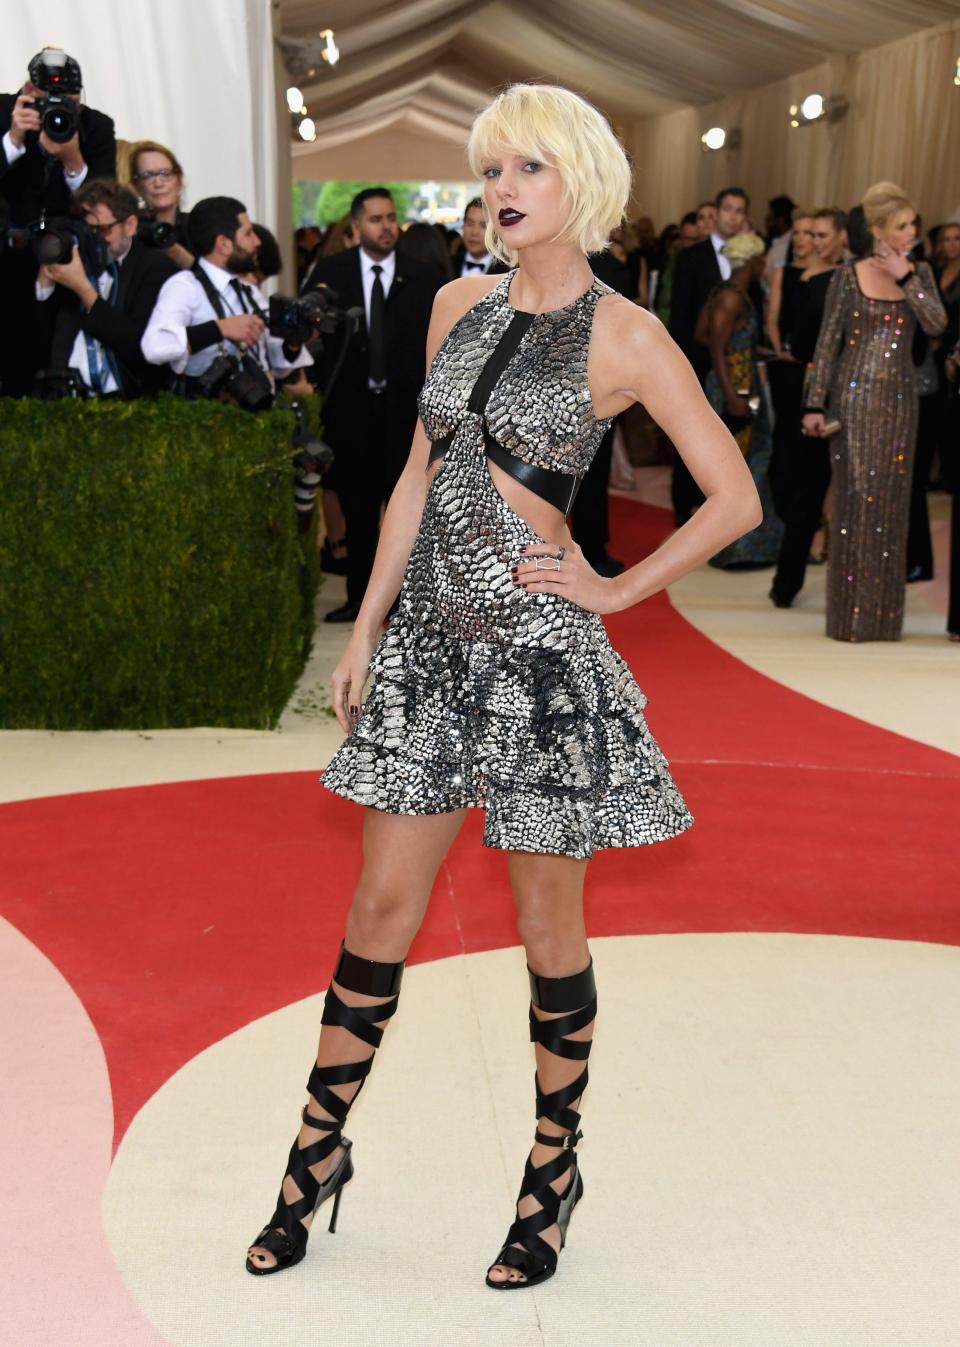 Taylor Swift poses at the Met Gala with bleached hair and wearing a short, flared metallic dress, dark lipstick, and strappy black heels.